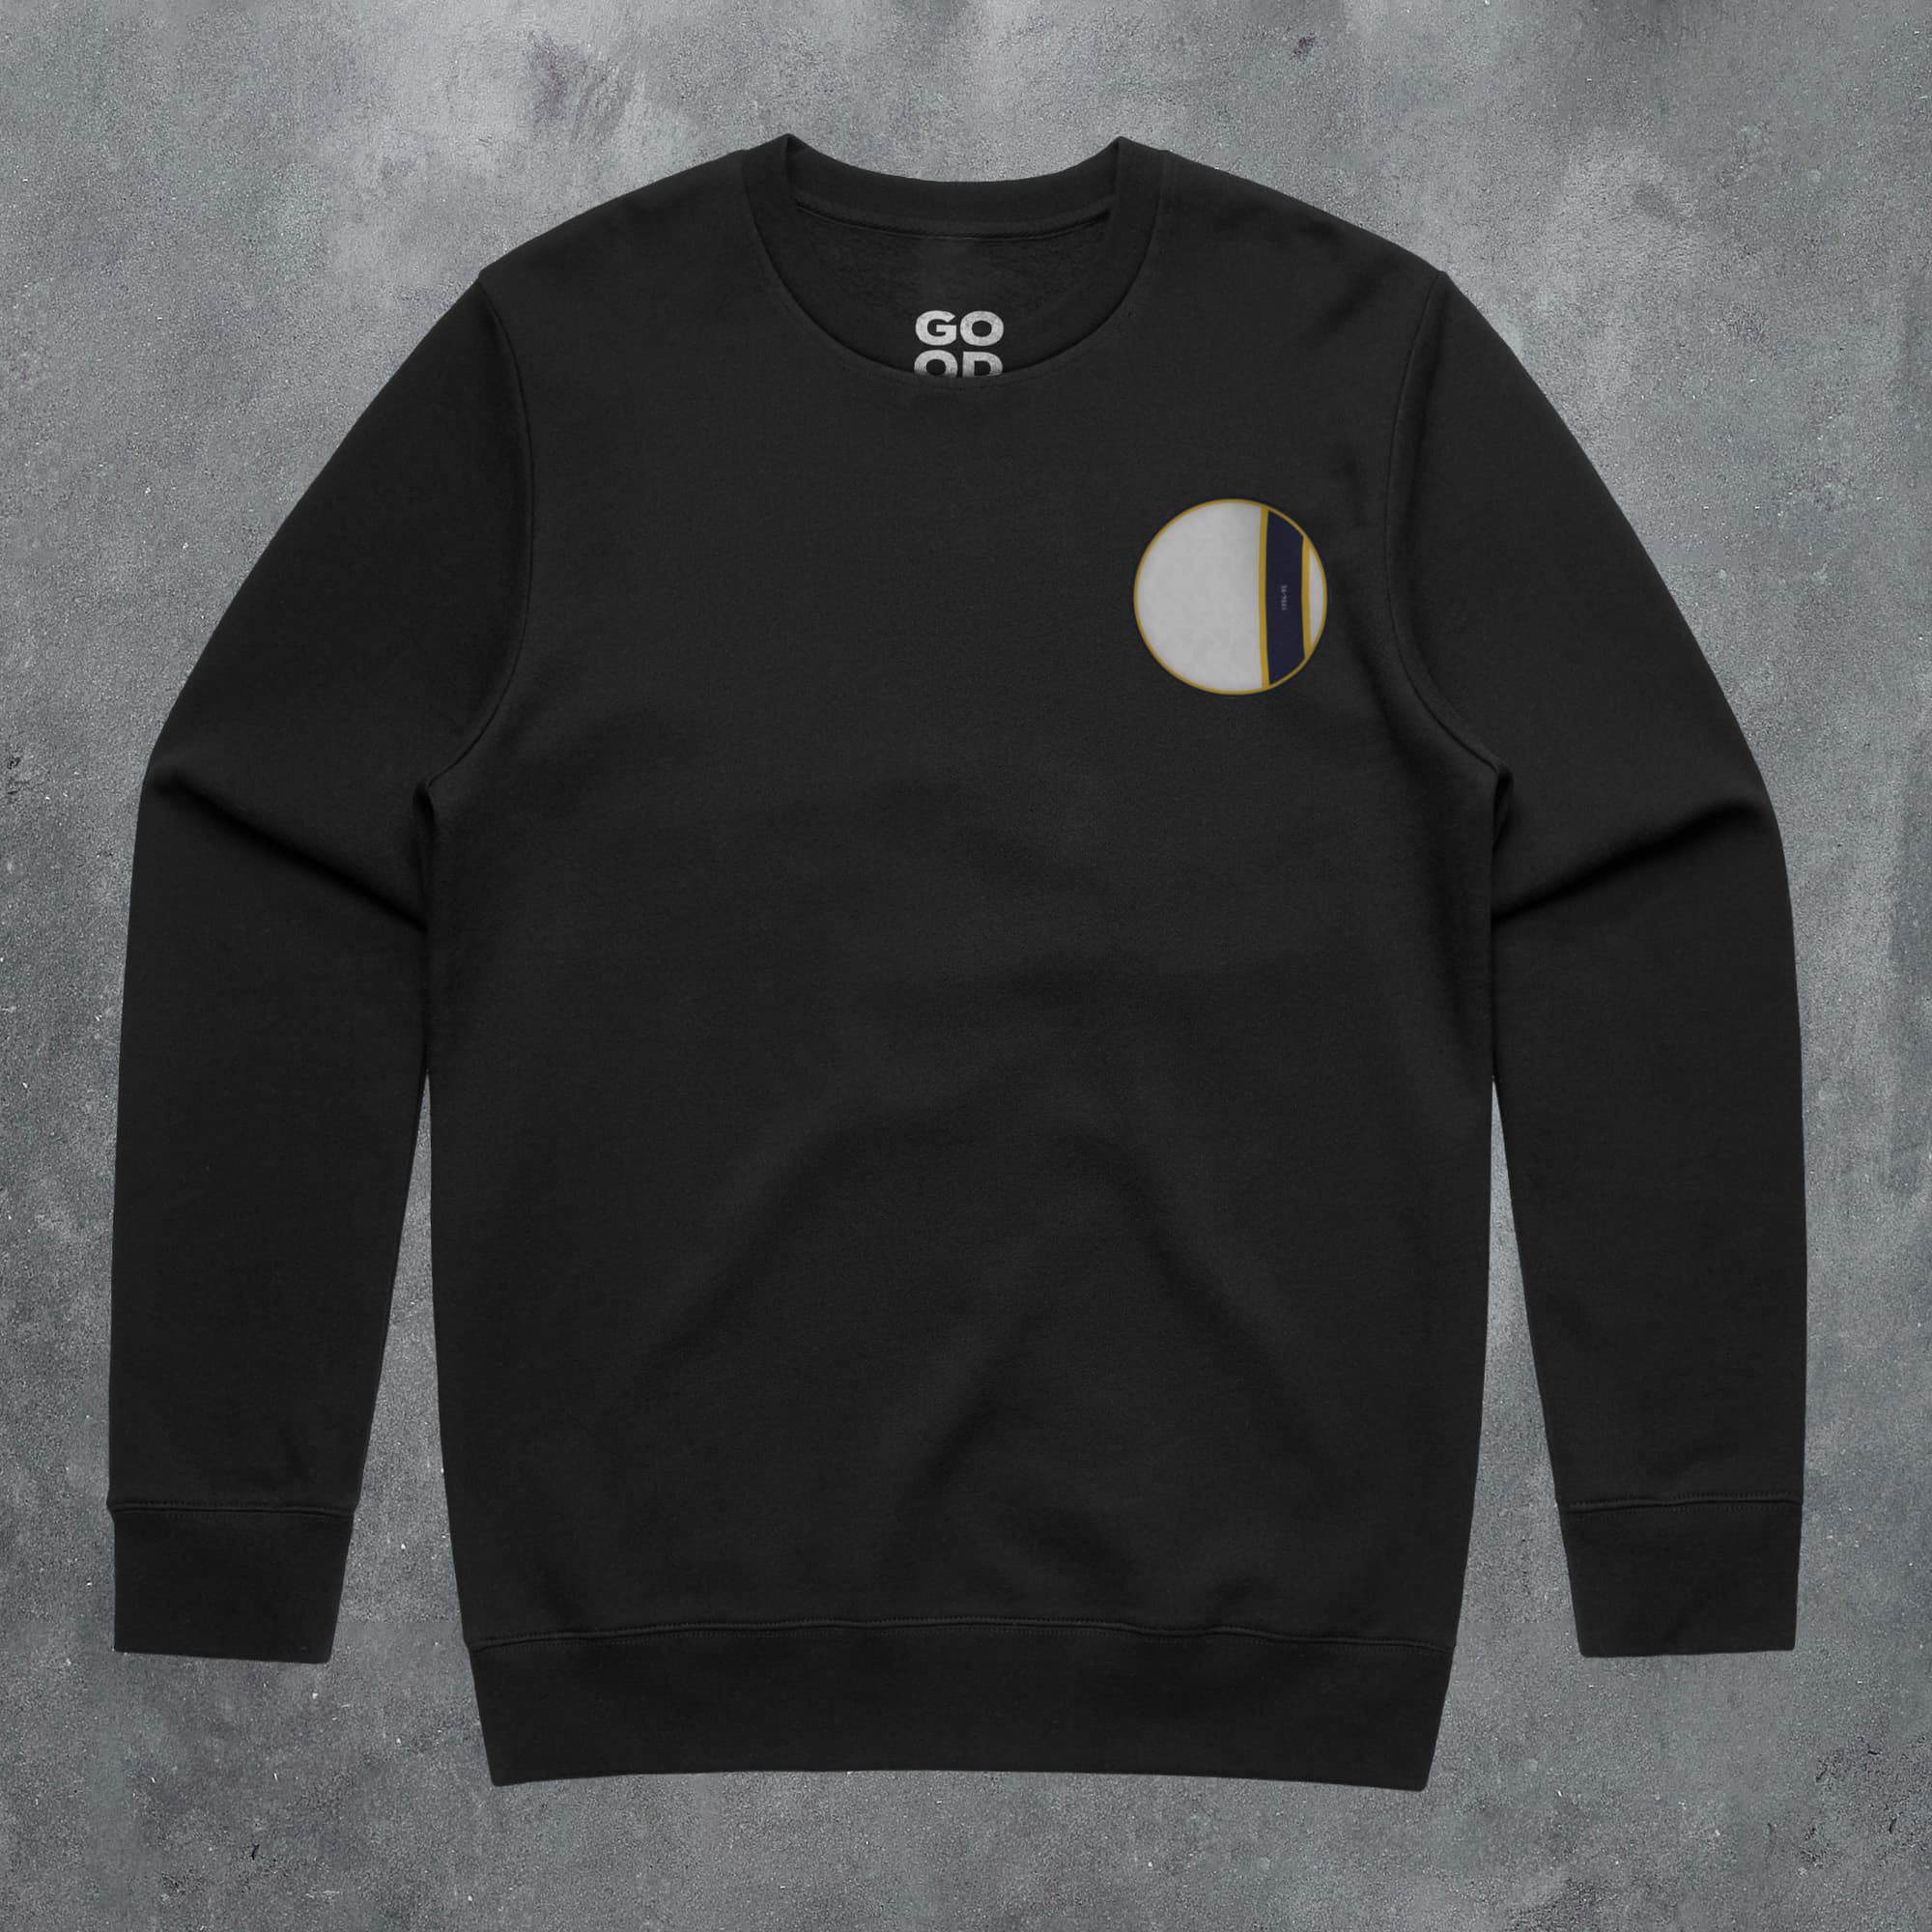 a black sweatshirt with a white circle on the front